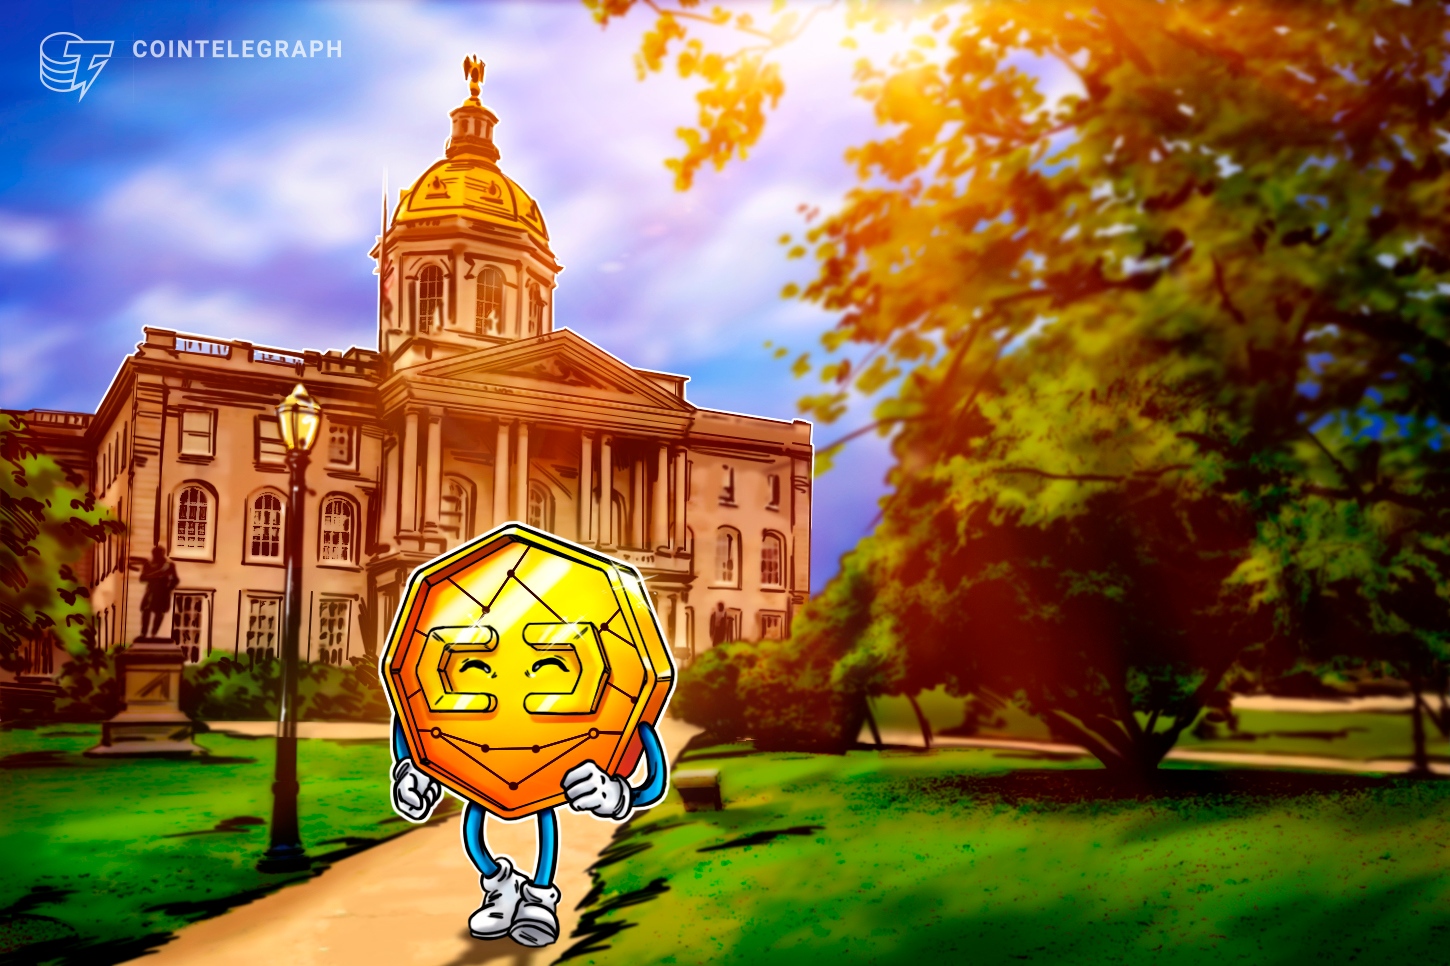 New-hampshire-could-become-an-alternative-for-crypto-firms-moving-to-the-bahamas